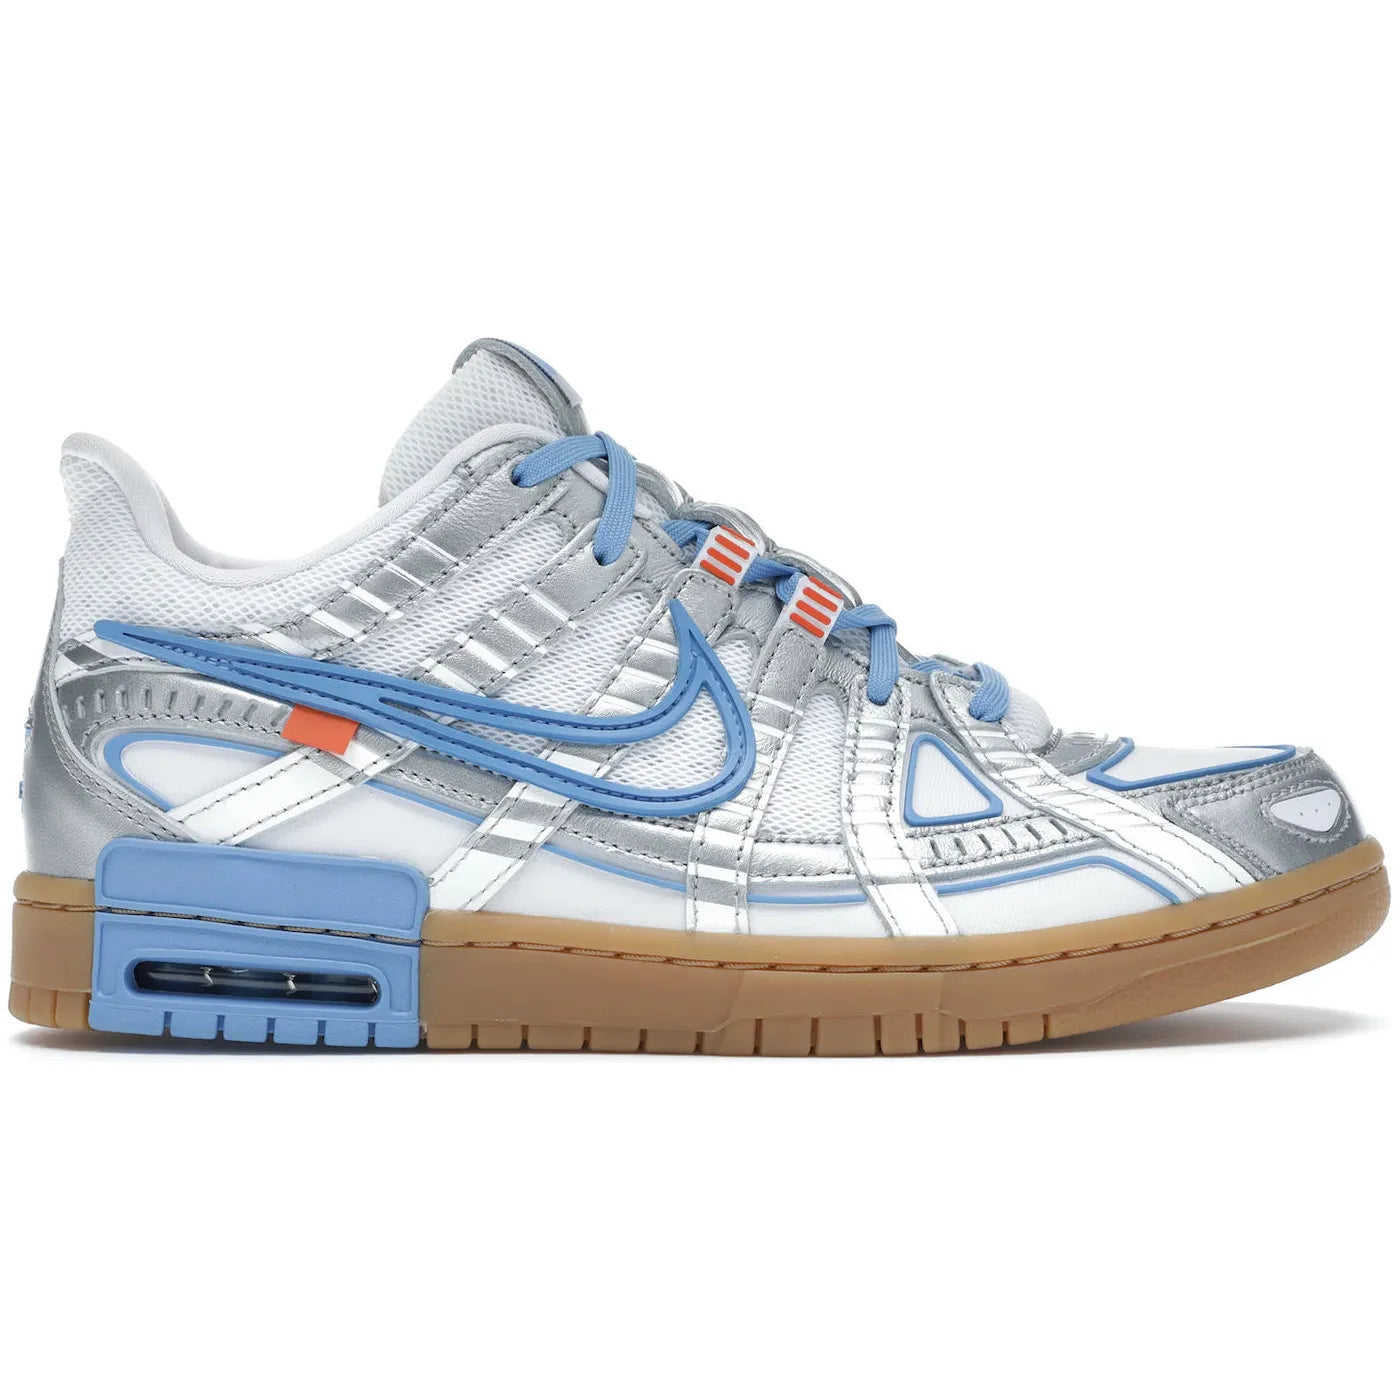 Nike - Off-White Rubber Dunk - UNC